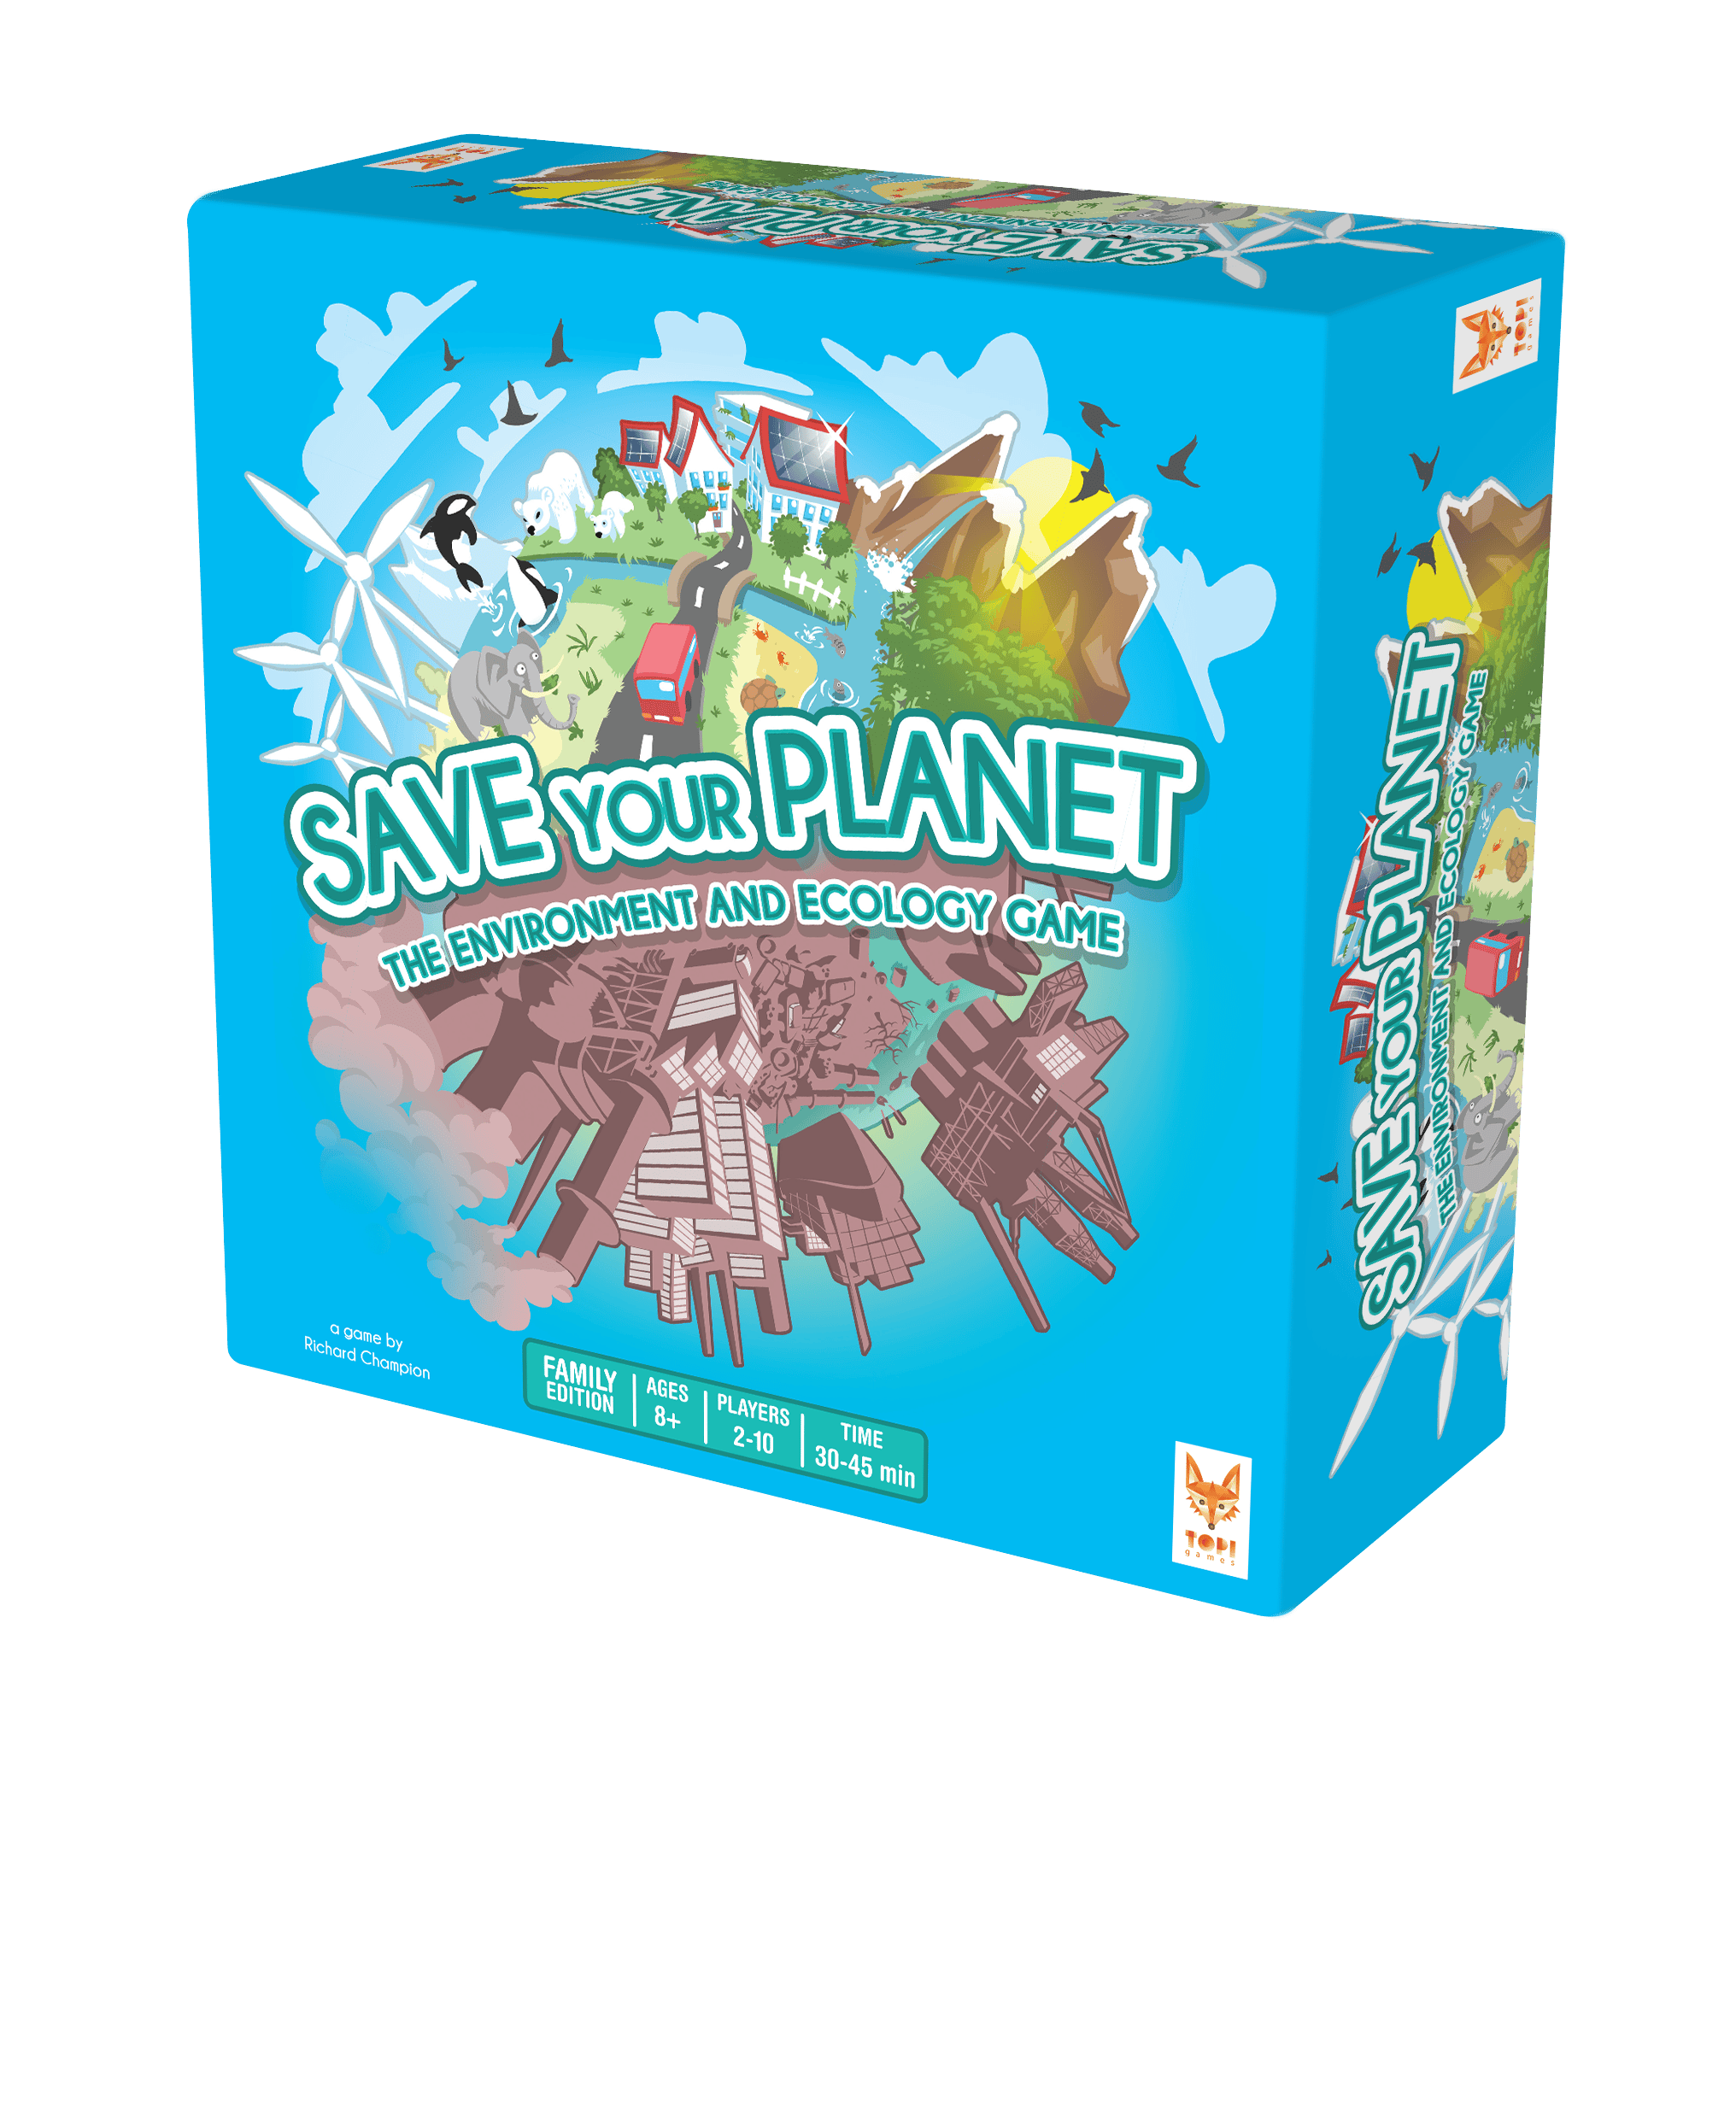 Save Your Planet ! Game Box